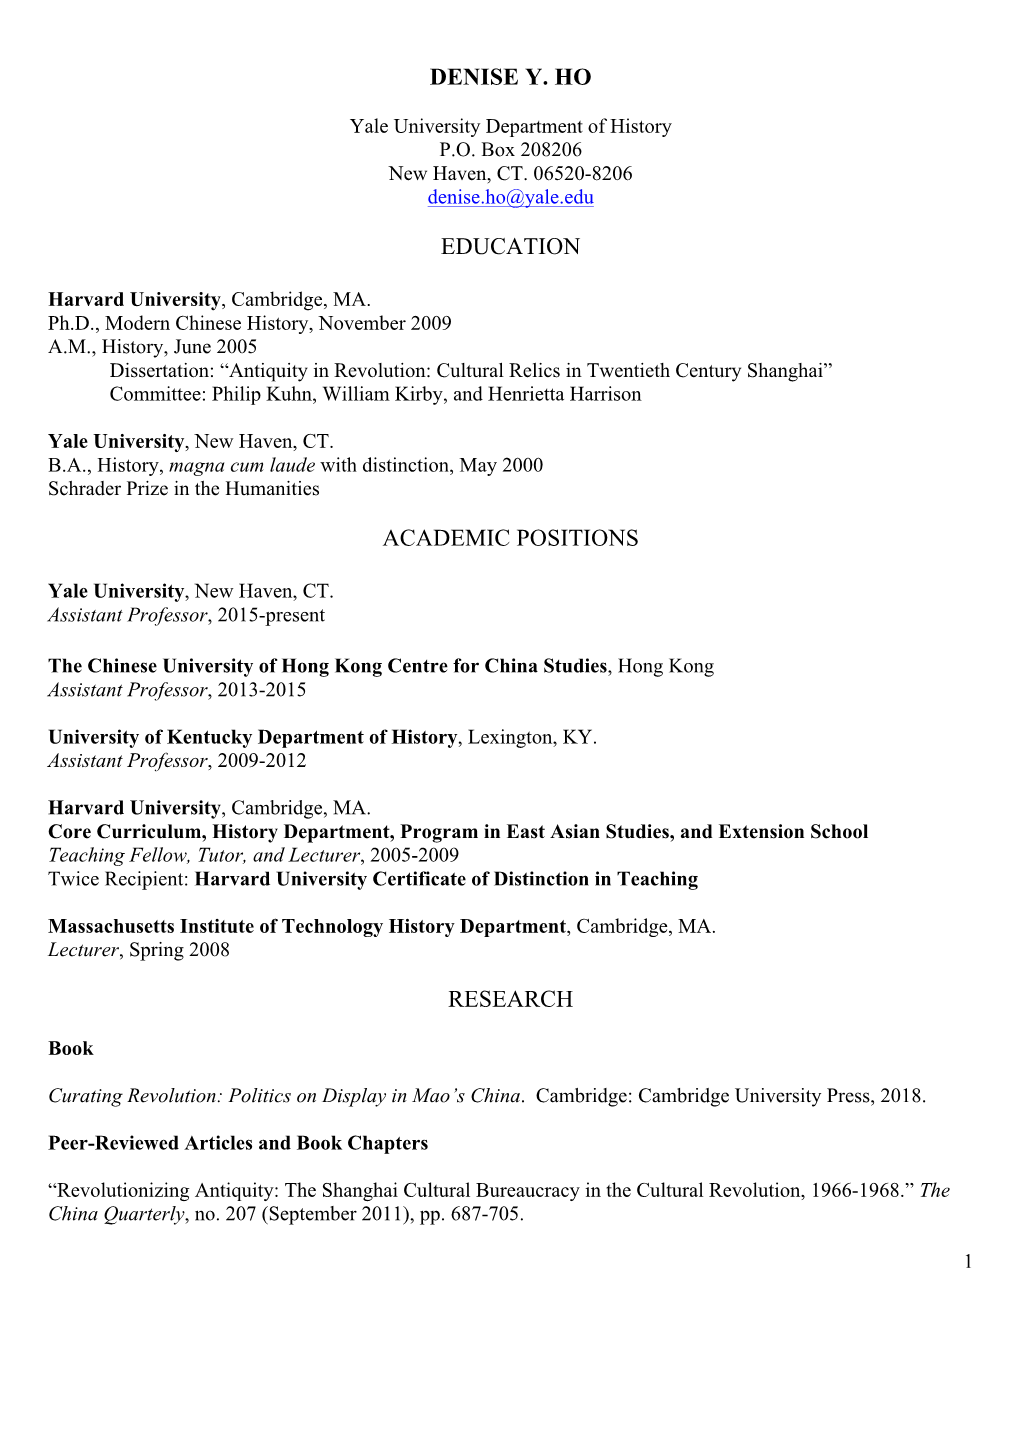 Denise Y. Ho Education Academic Positions Research